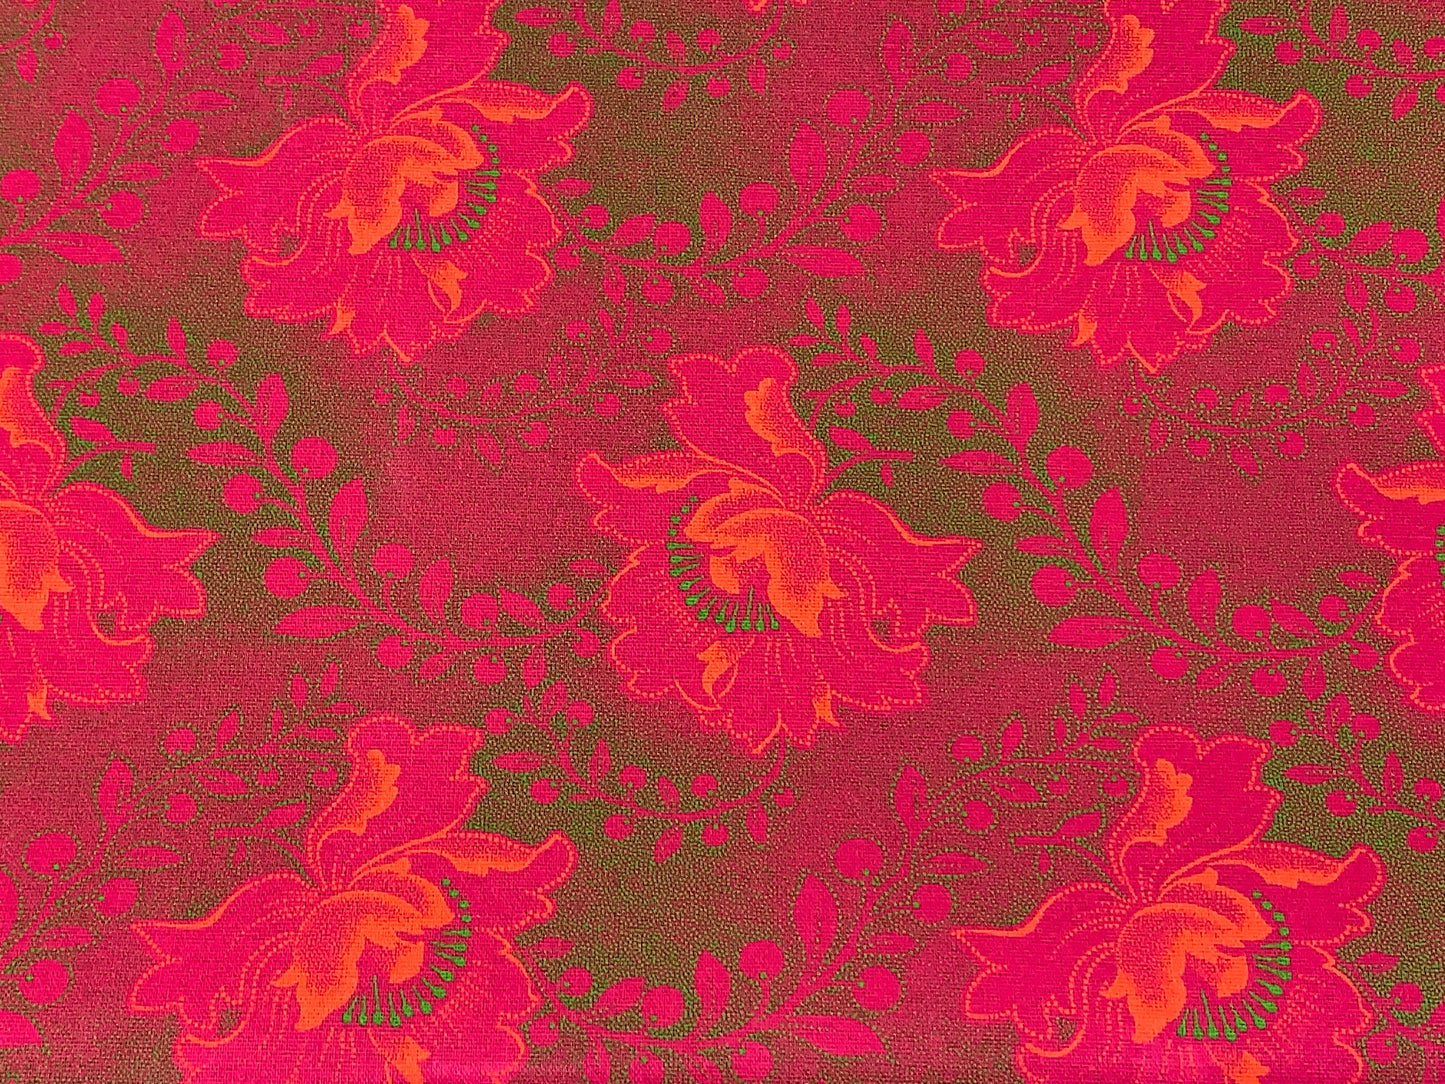 South African Shweshwe Fabric by the YARD. Authentic DaGama ThreeCats Hot Pink & Orange Hibiscus. 100% Cotton for Quilting, Apparel, Décor.